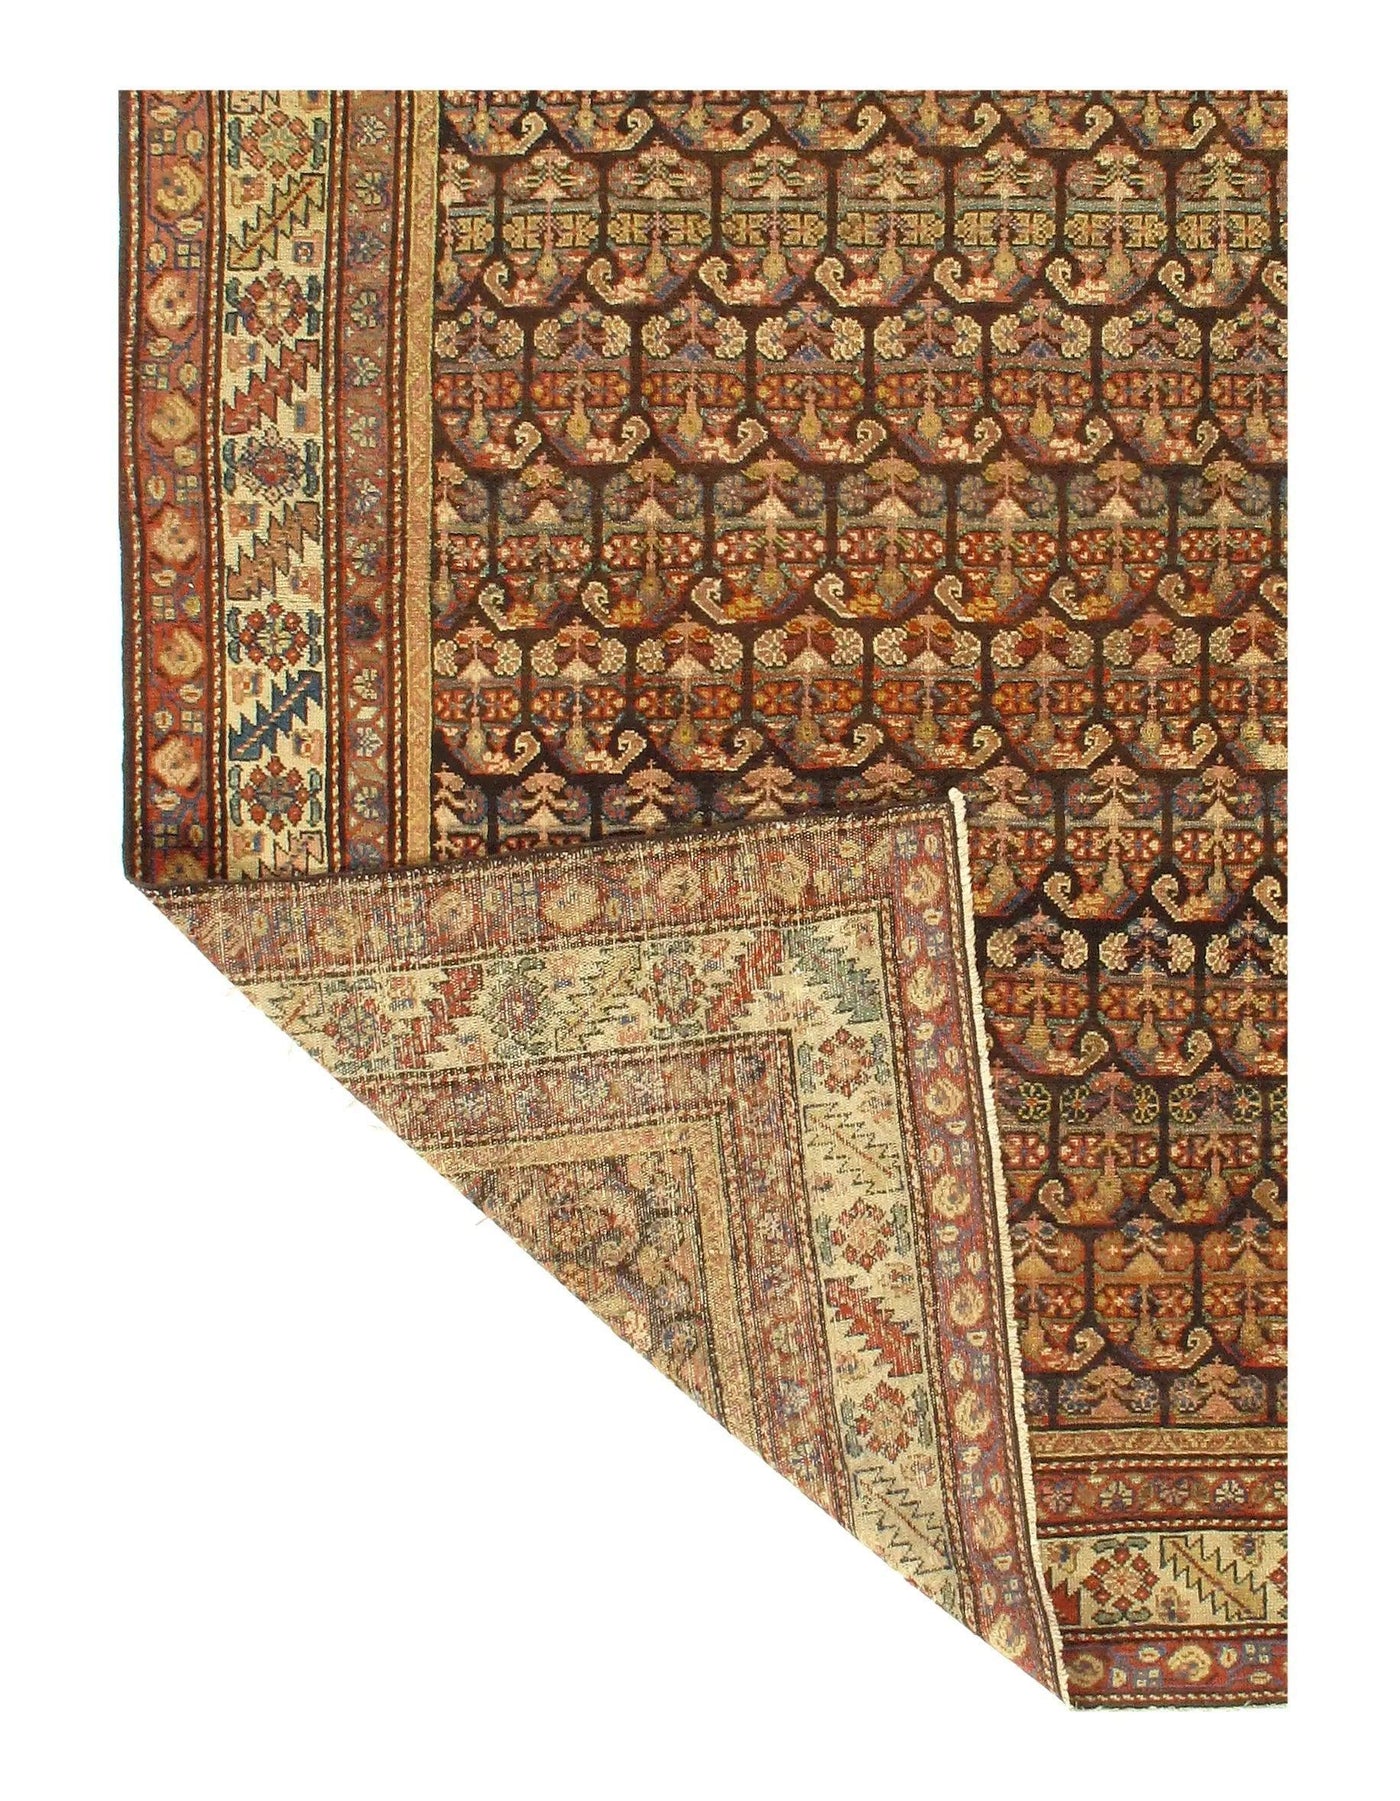 Canvello Persian Hamadan Brown Rugs For Living Room - 5' X 8'9"